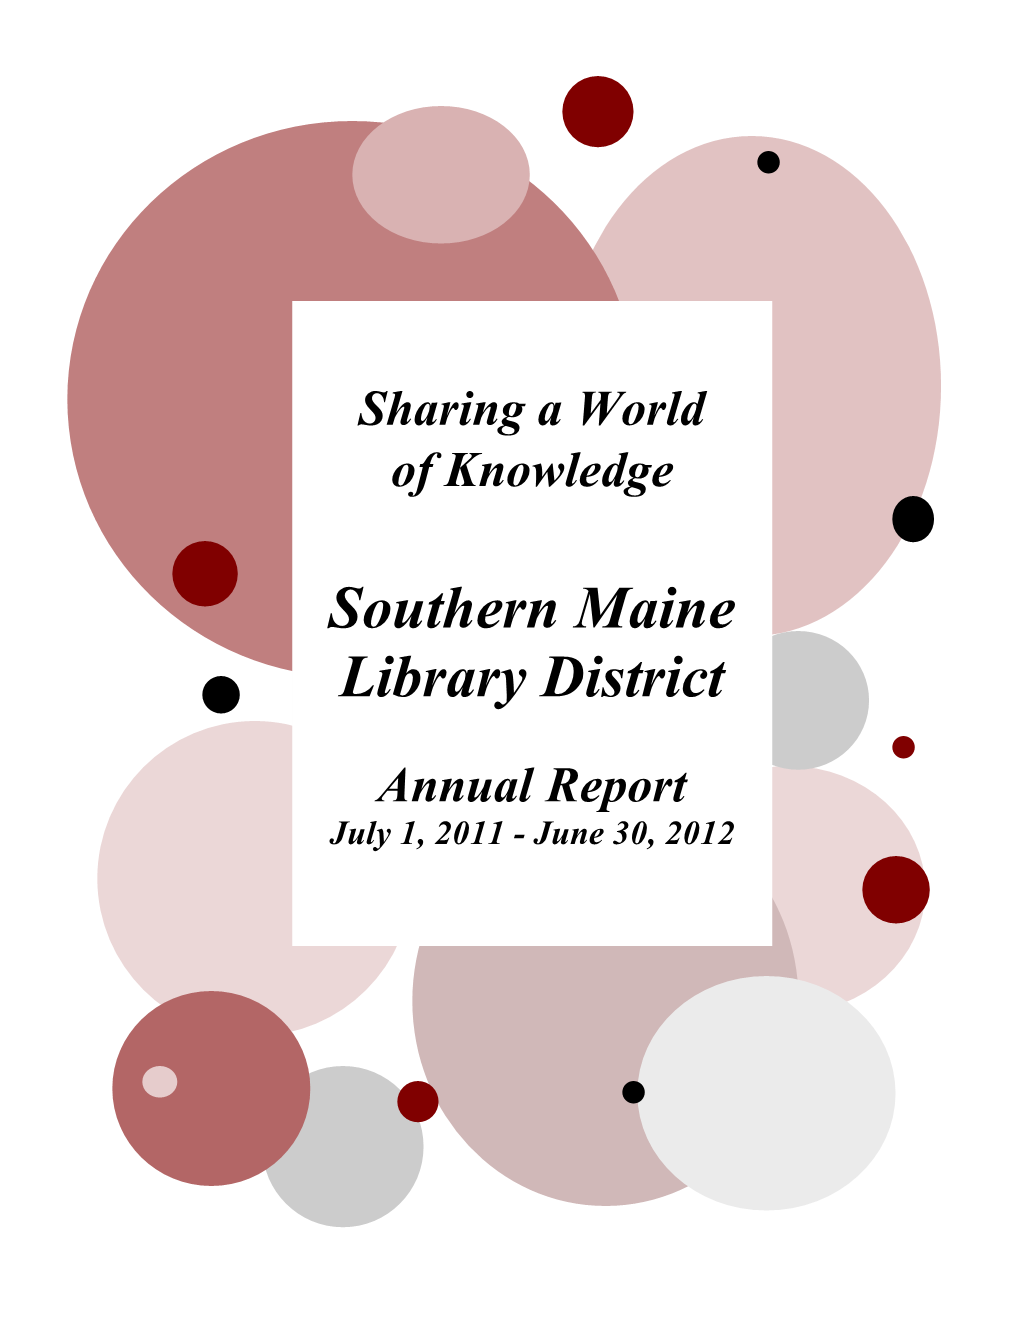 Southern Maine Library District